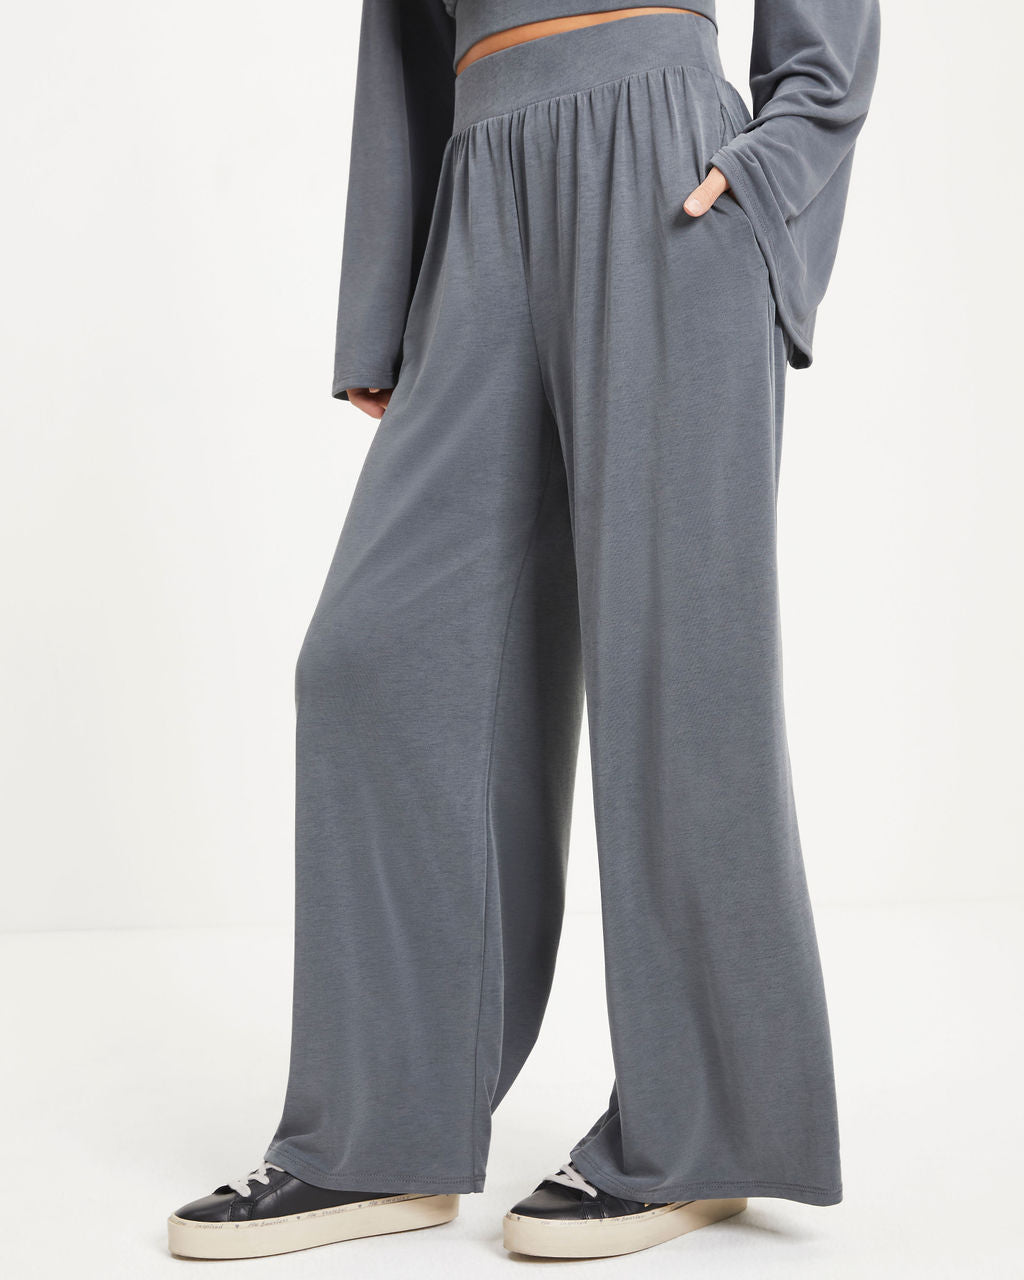 Molly Pocketed Wide Leg Pants - Charcoal – Zreis